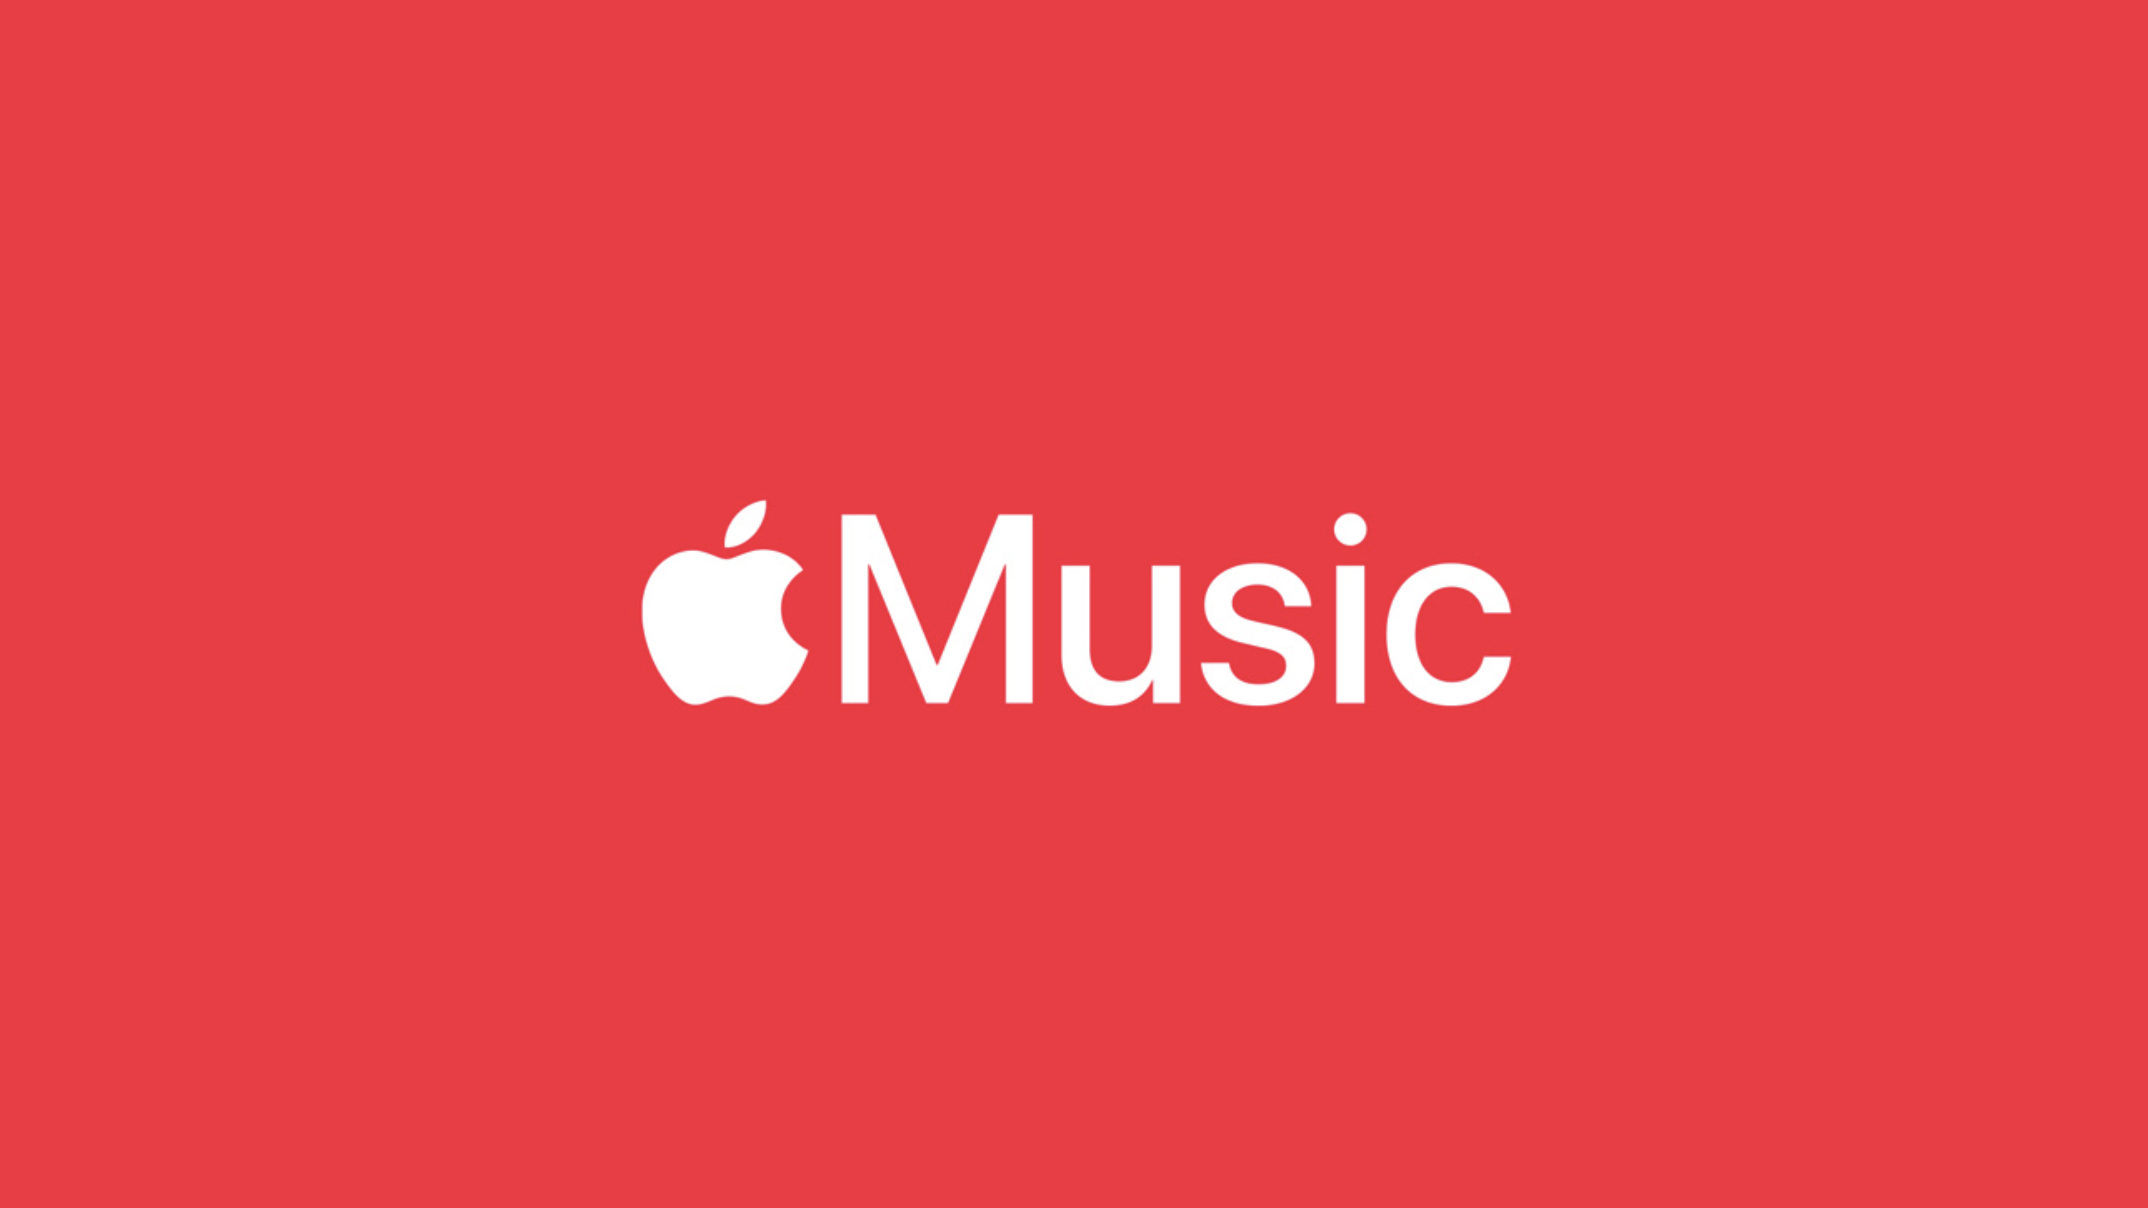 Apple Music’s $50M Annual Sponsorship Deal for Super Bowl Halftime Show with NFL.